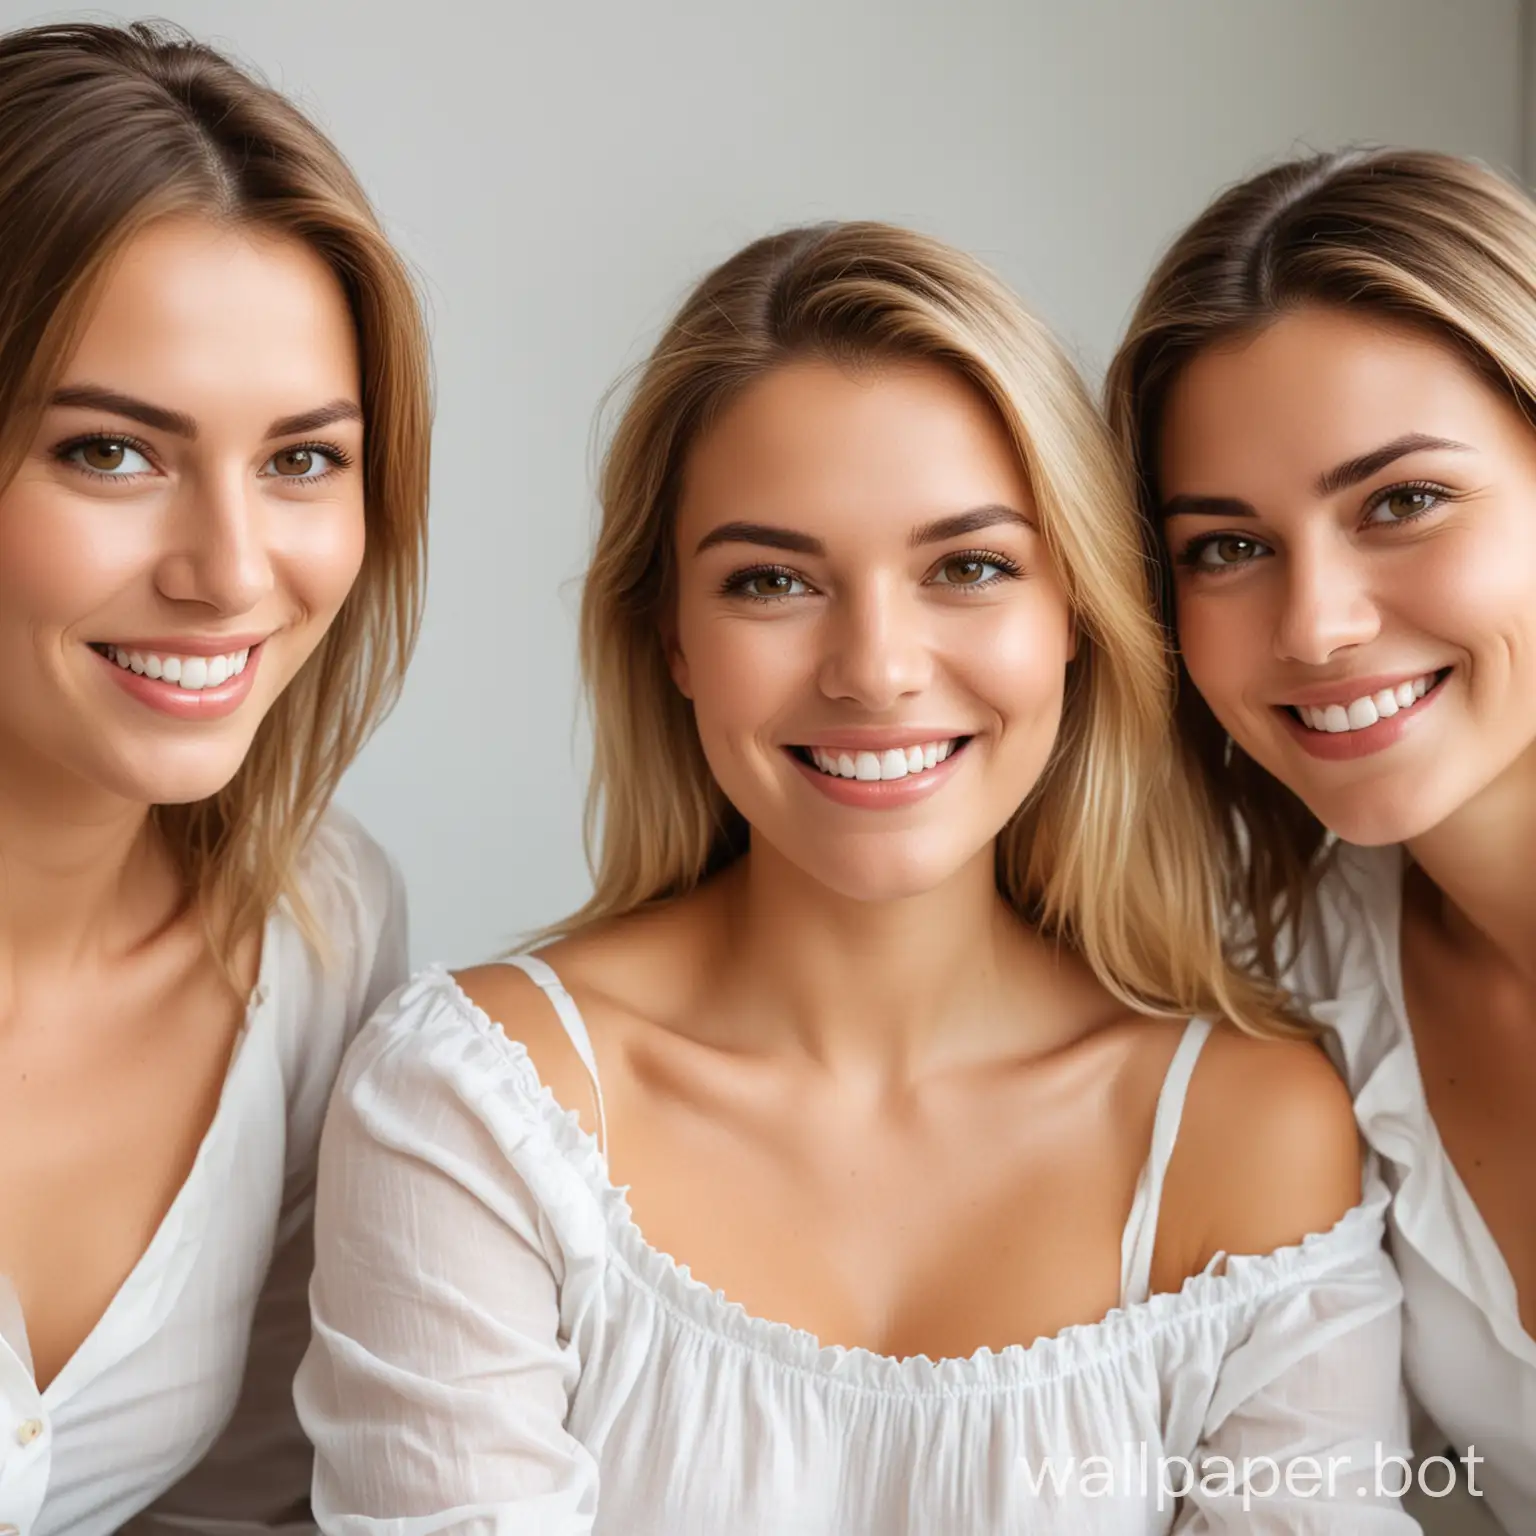 The Very same beautiful woman with blond hair and medium sized breasts wearing a plain white blouse smiling  sitting next to 2 other women with brown hair who are also smiling with clear view of all faces